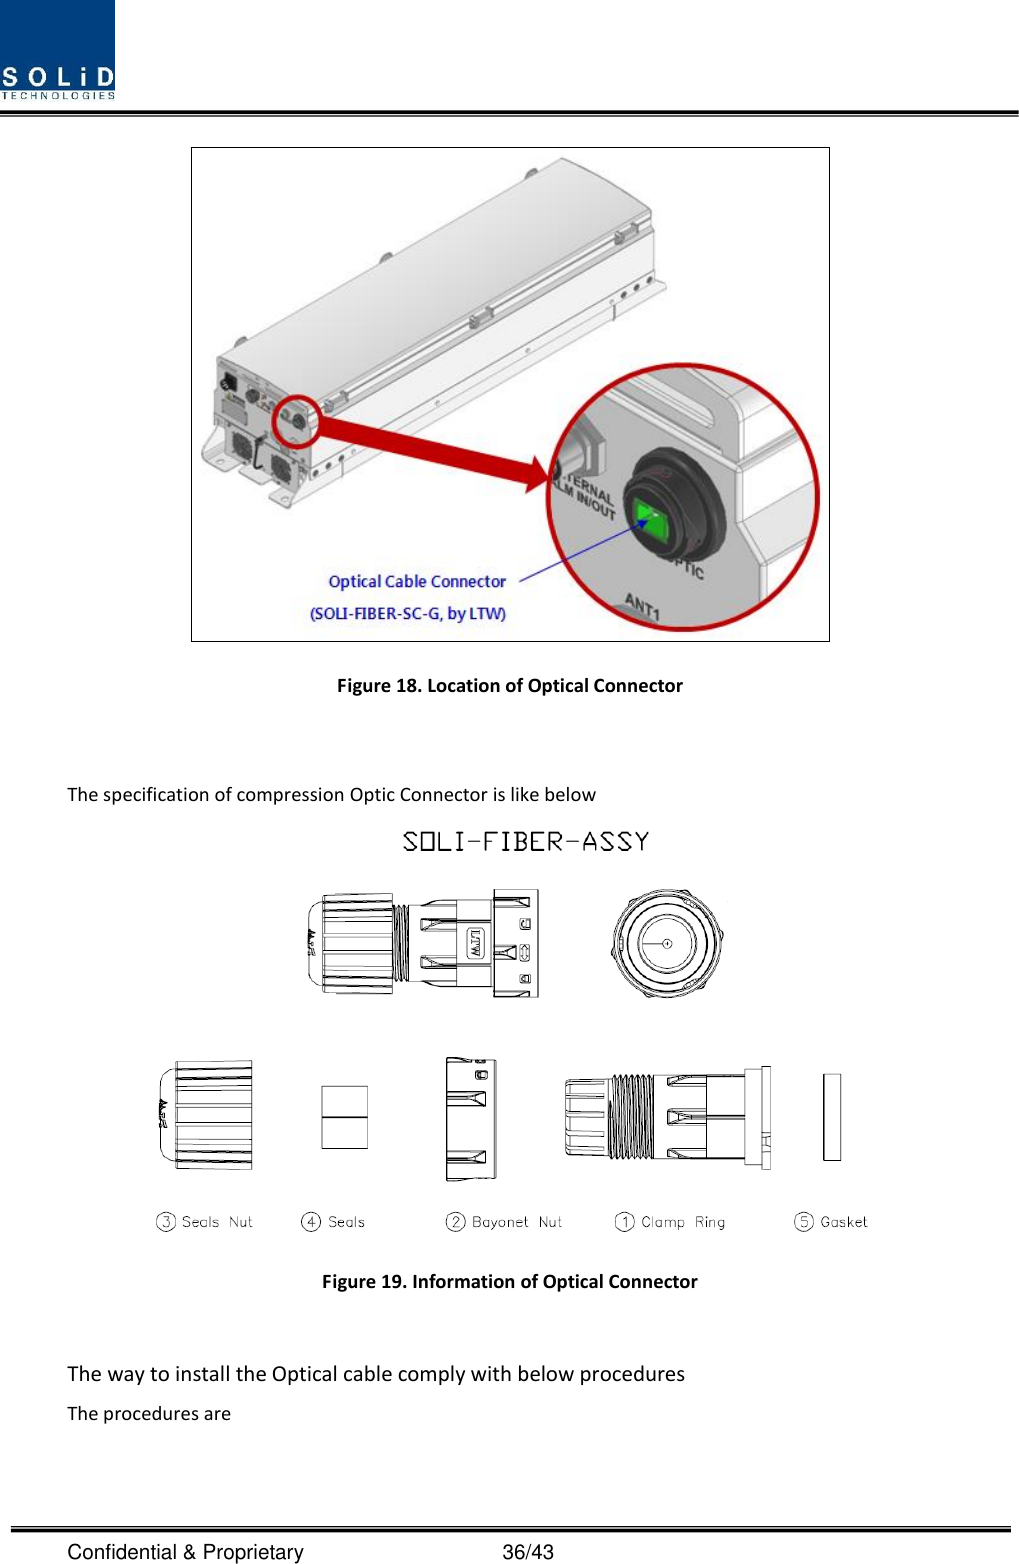  Confidential &amp; Proprietary                                      36/43  Figure 18. Location of Optical Connector  The specification of compression Optic Connector is like below   Figure 19. Information of Optical Connector  The way to install the Optical cable comply with below procedures The procedures are  